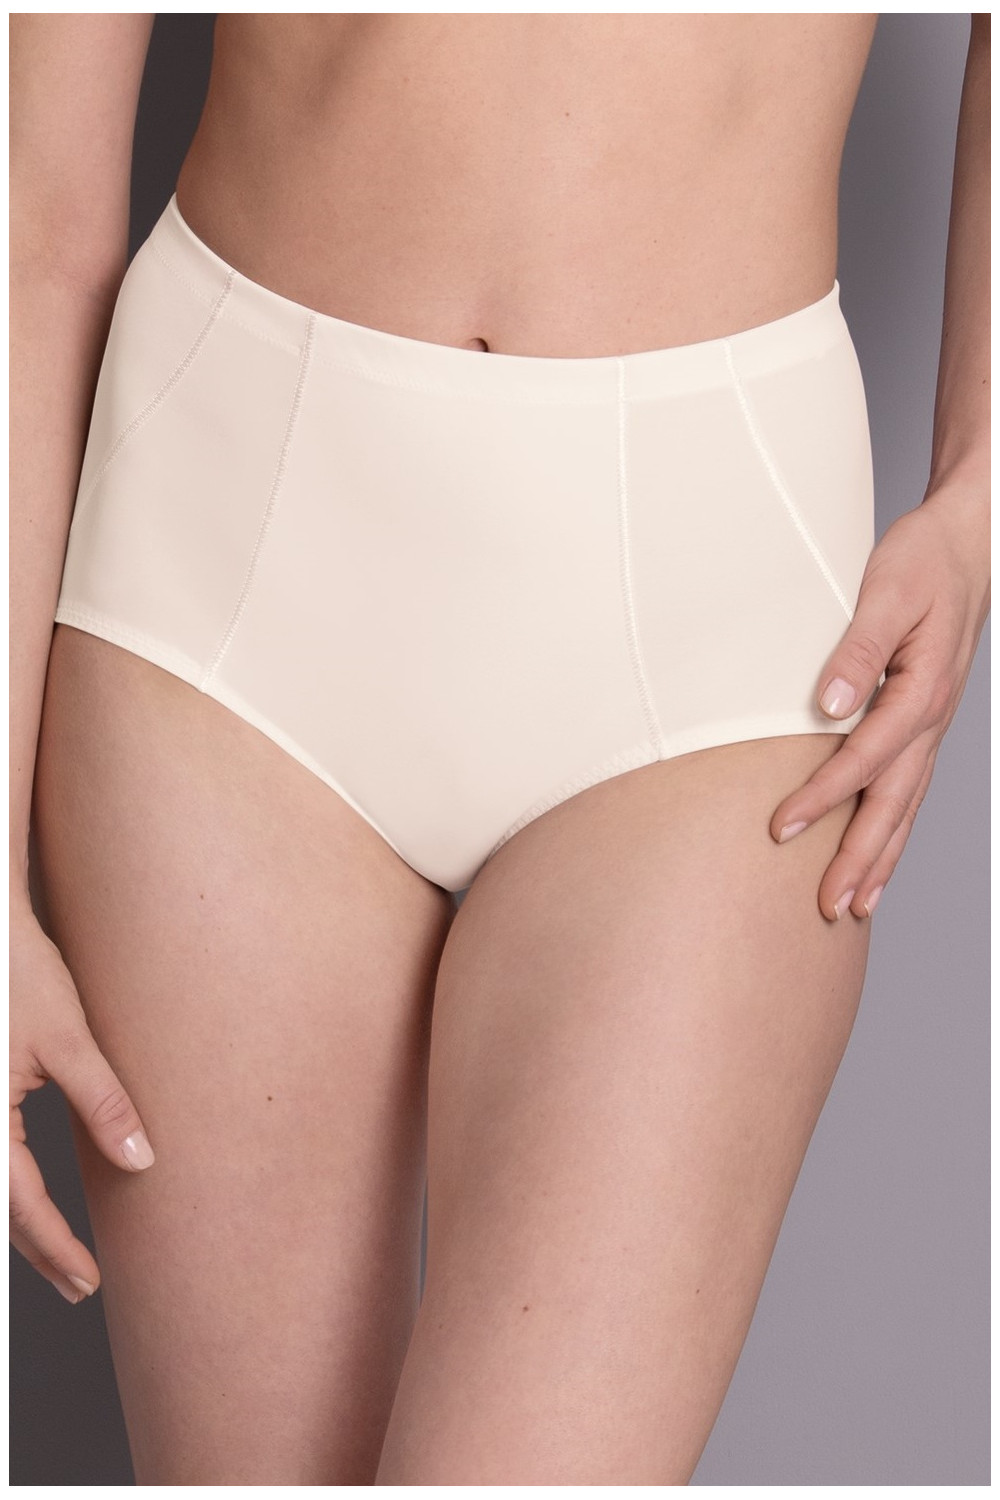 HIGH WAISTED SHAPER BRIEFS POWER CONTROL GIRDLE MADE IN EUROPE